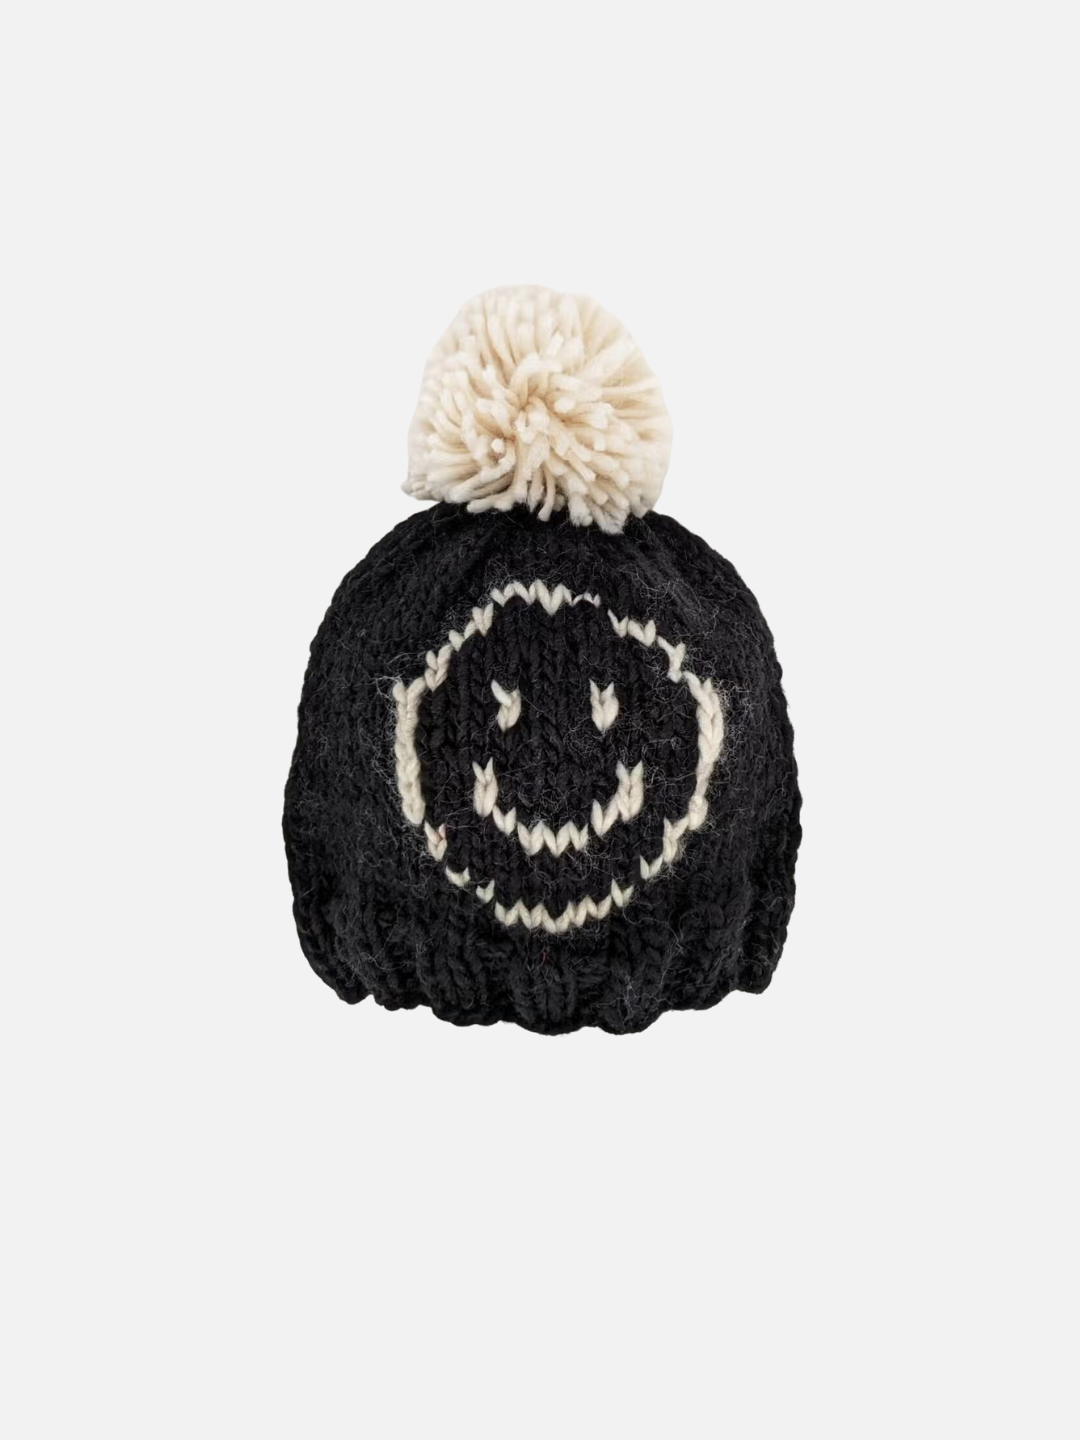 Baby and kids beanie hat in chunky knit black yarn with an off-white smiley face on the front and an off-white pom-pom on top.